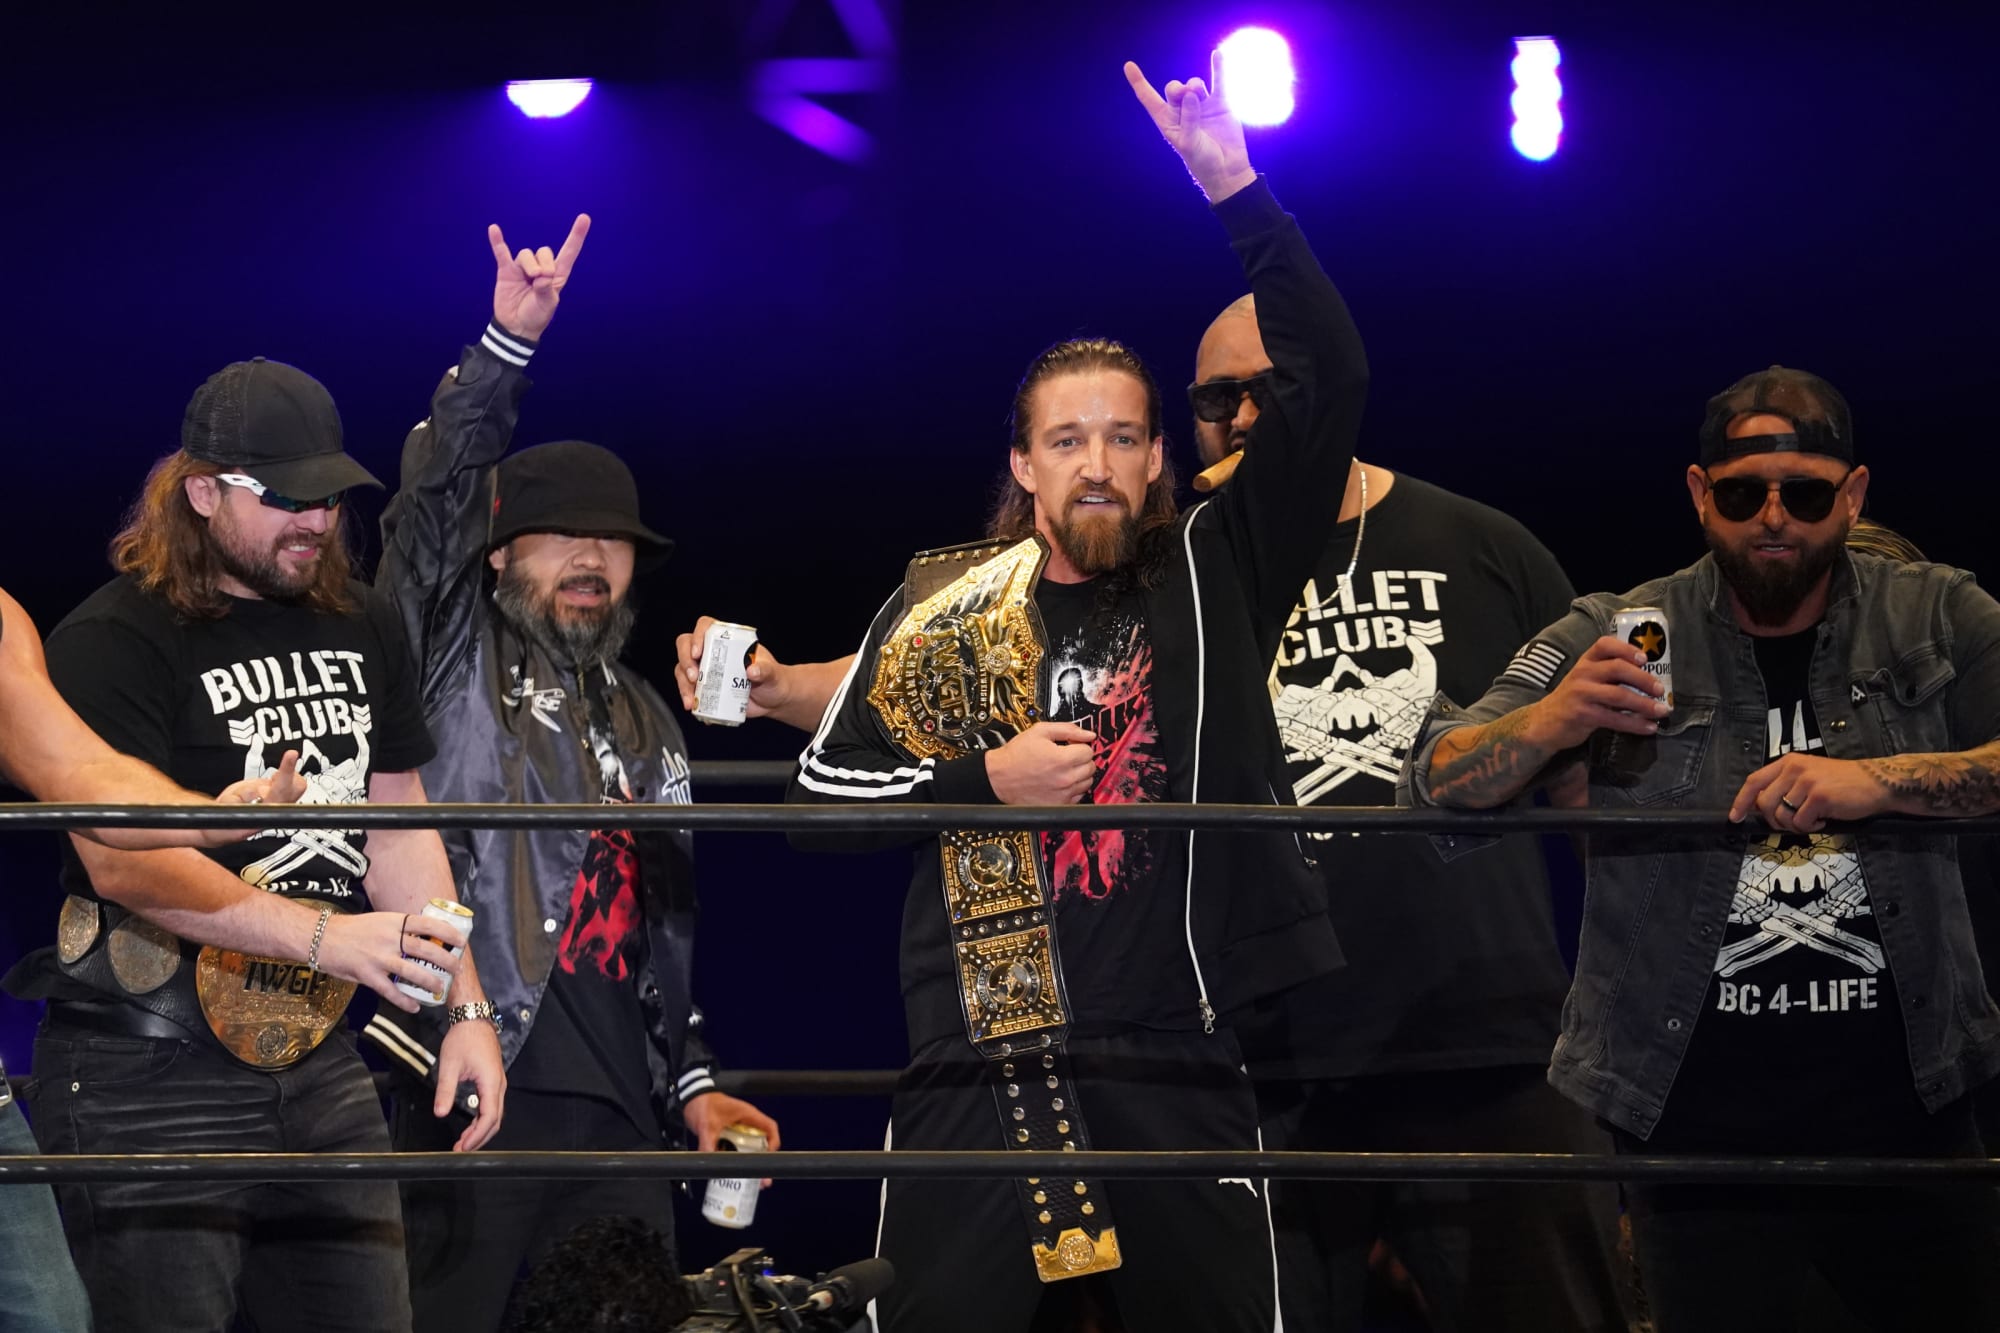 Bullet Club is still a relevant part of today's wrestling industry